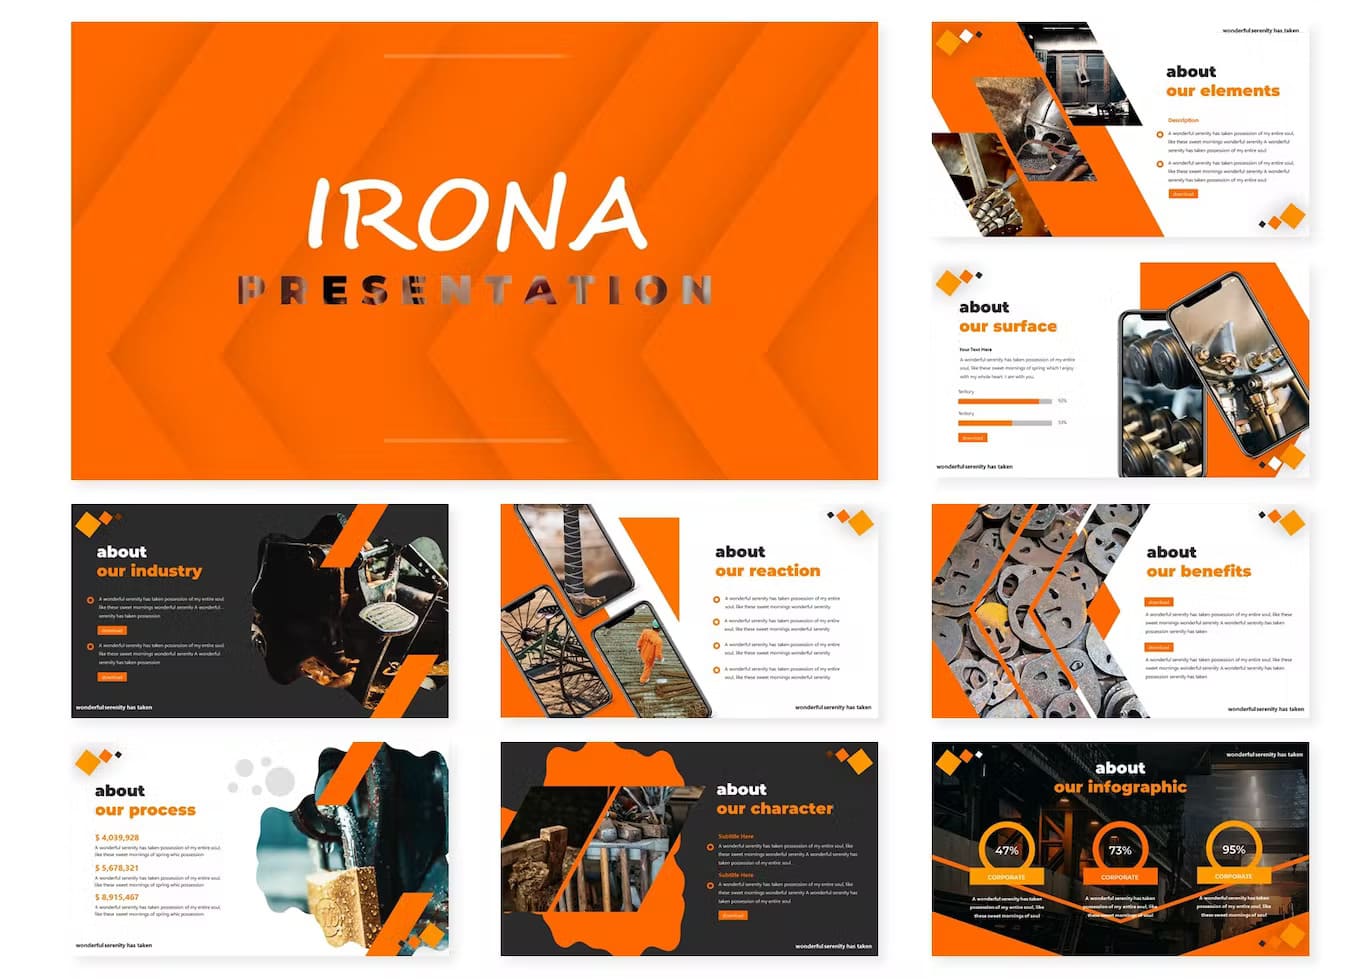 9 Slides Irona Presentation: About our elements, about our surface, about our industry, about our reaction.